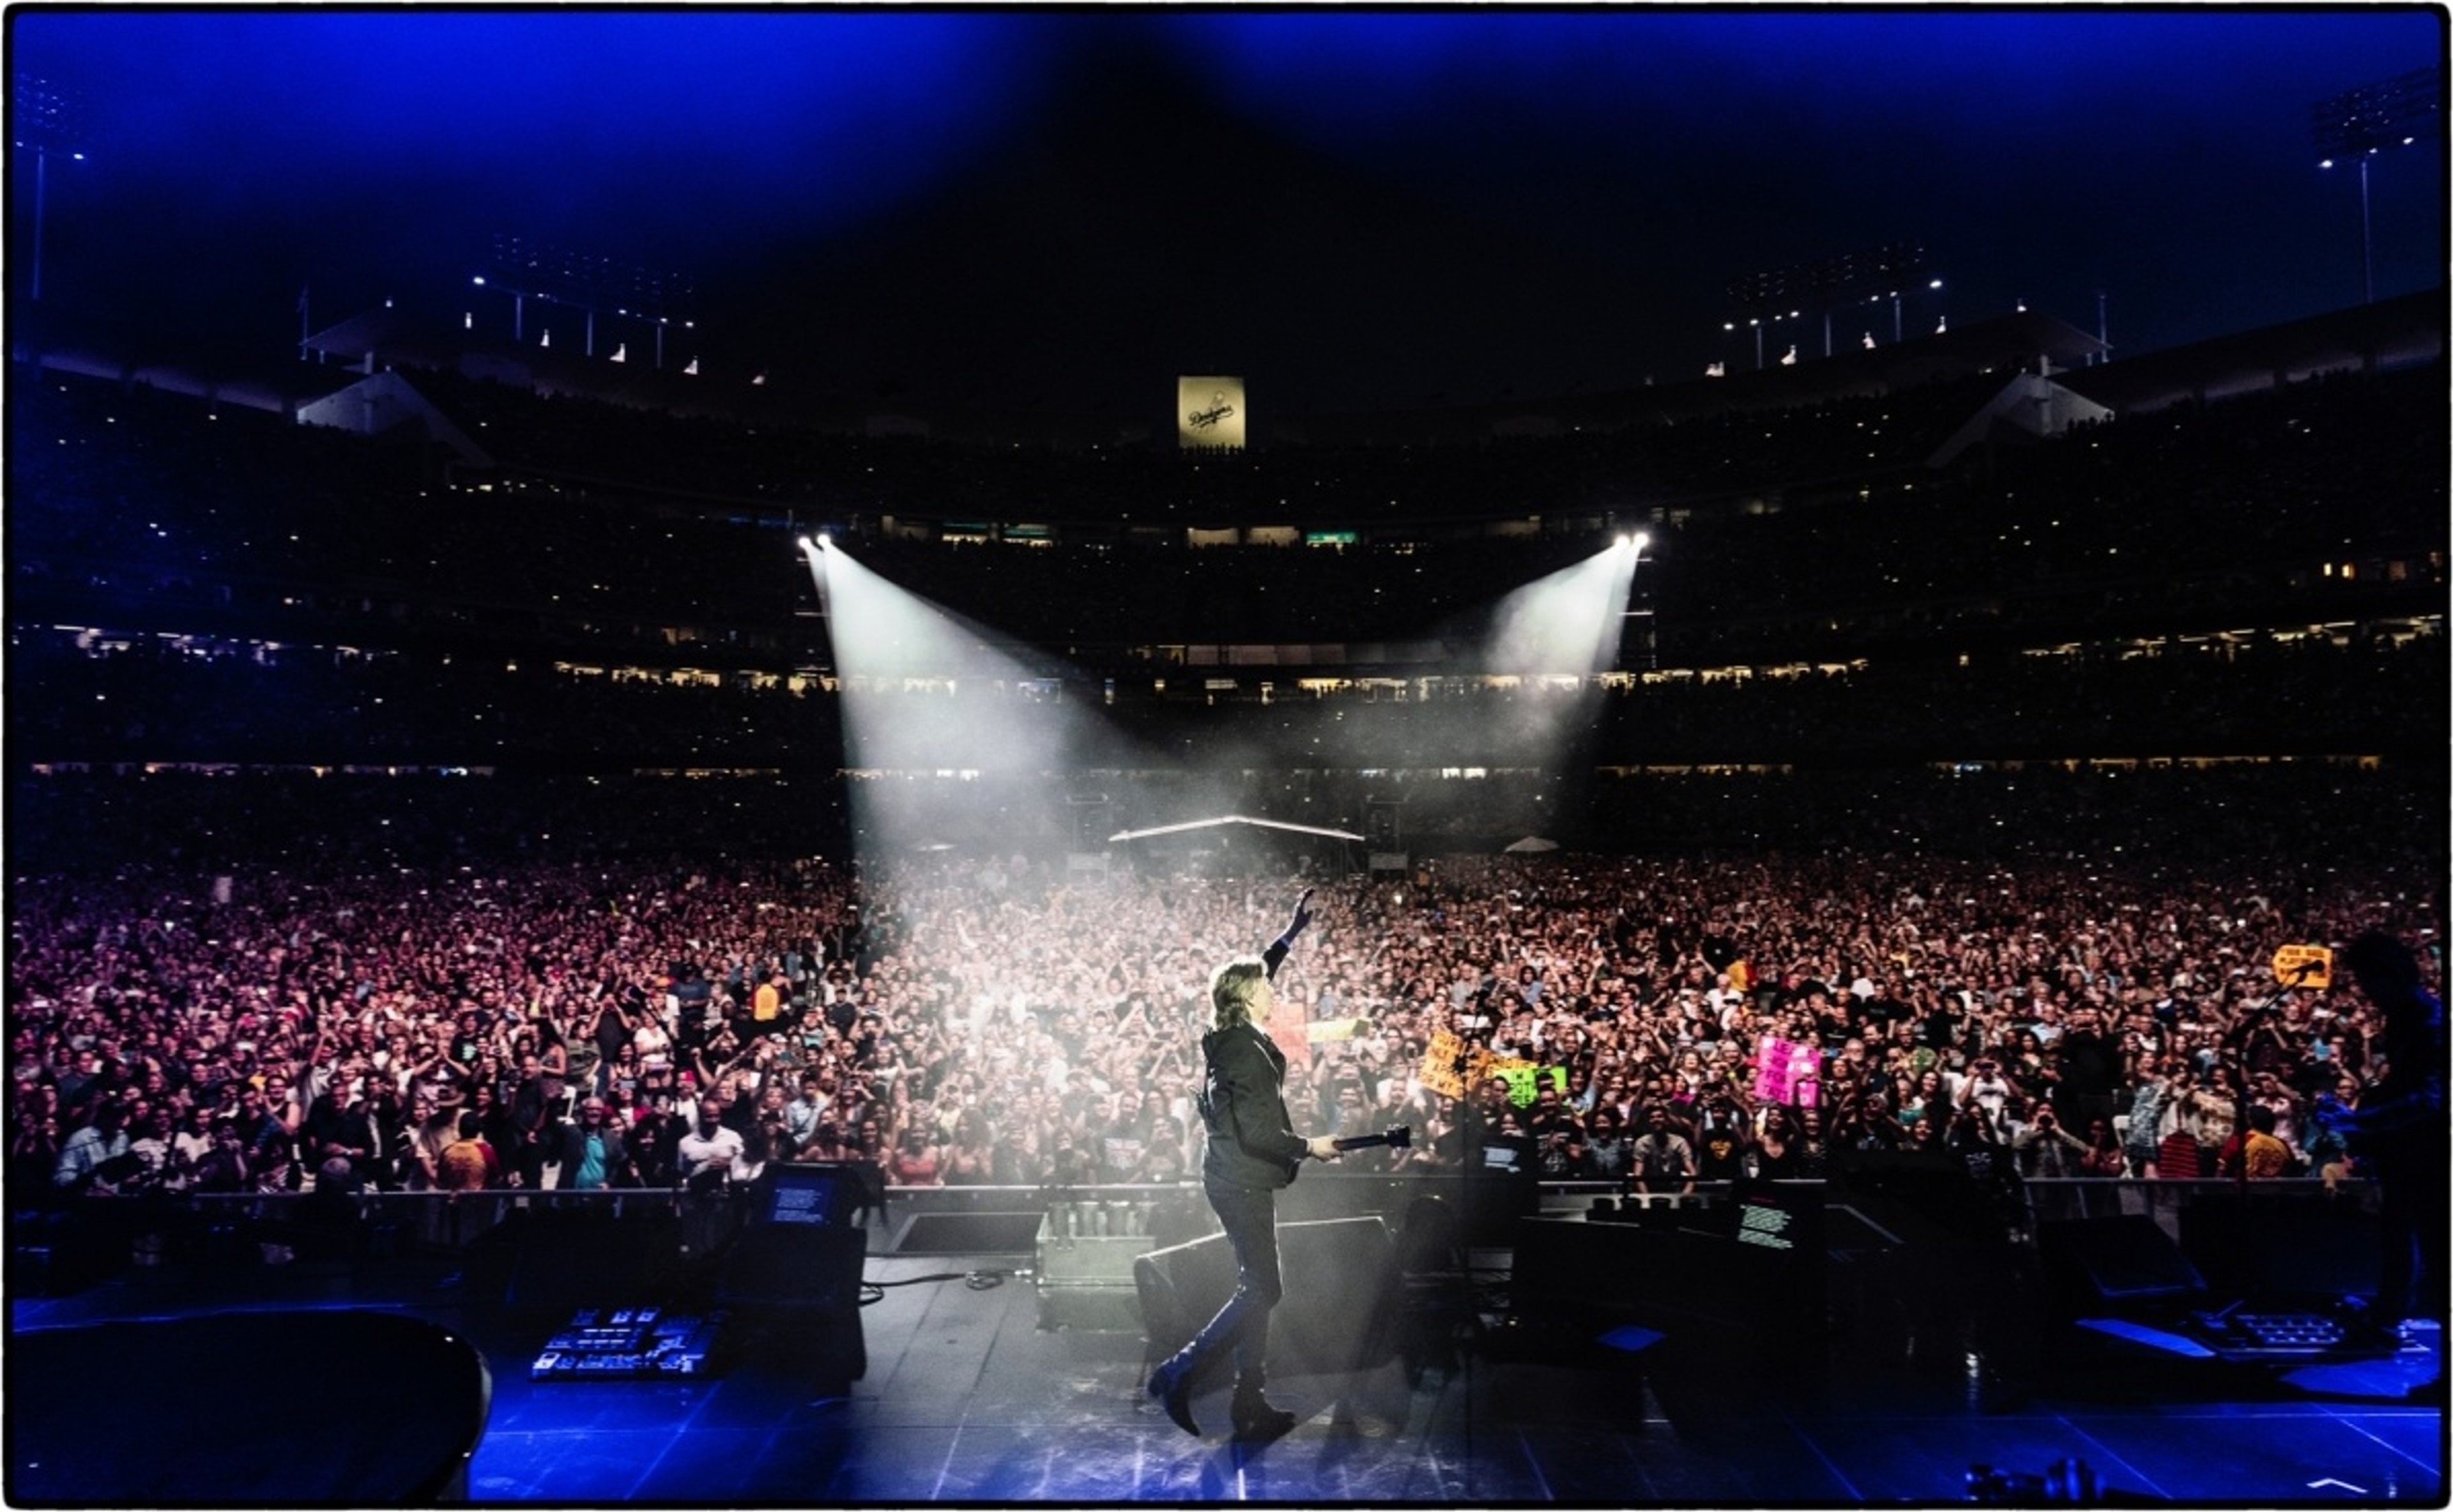 Paul ends his 2019 tour playing the iconic Dodger Stadium, Los Angeles.